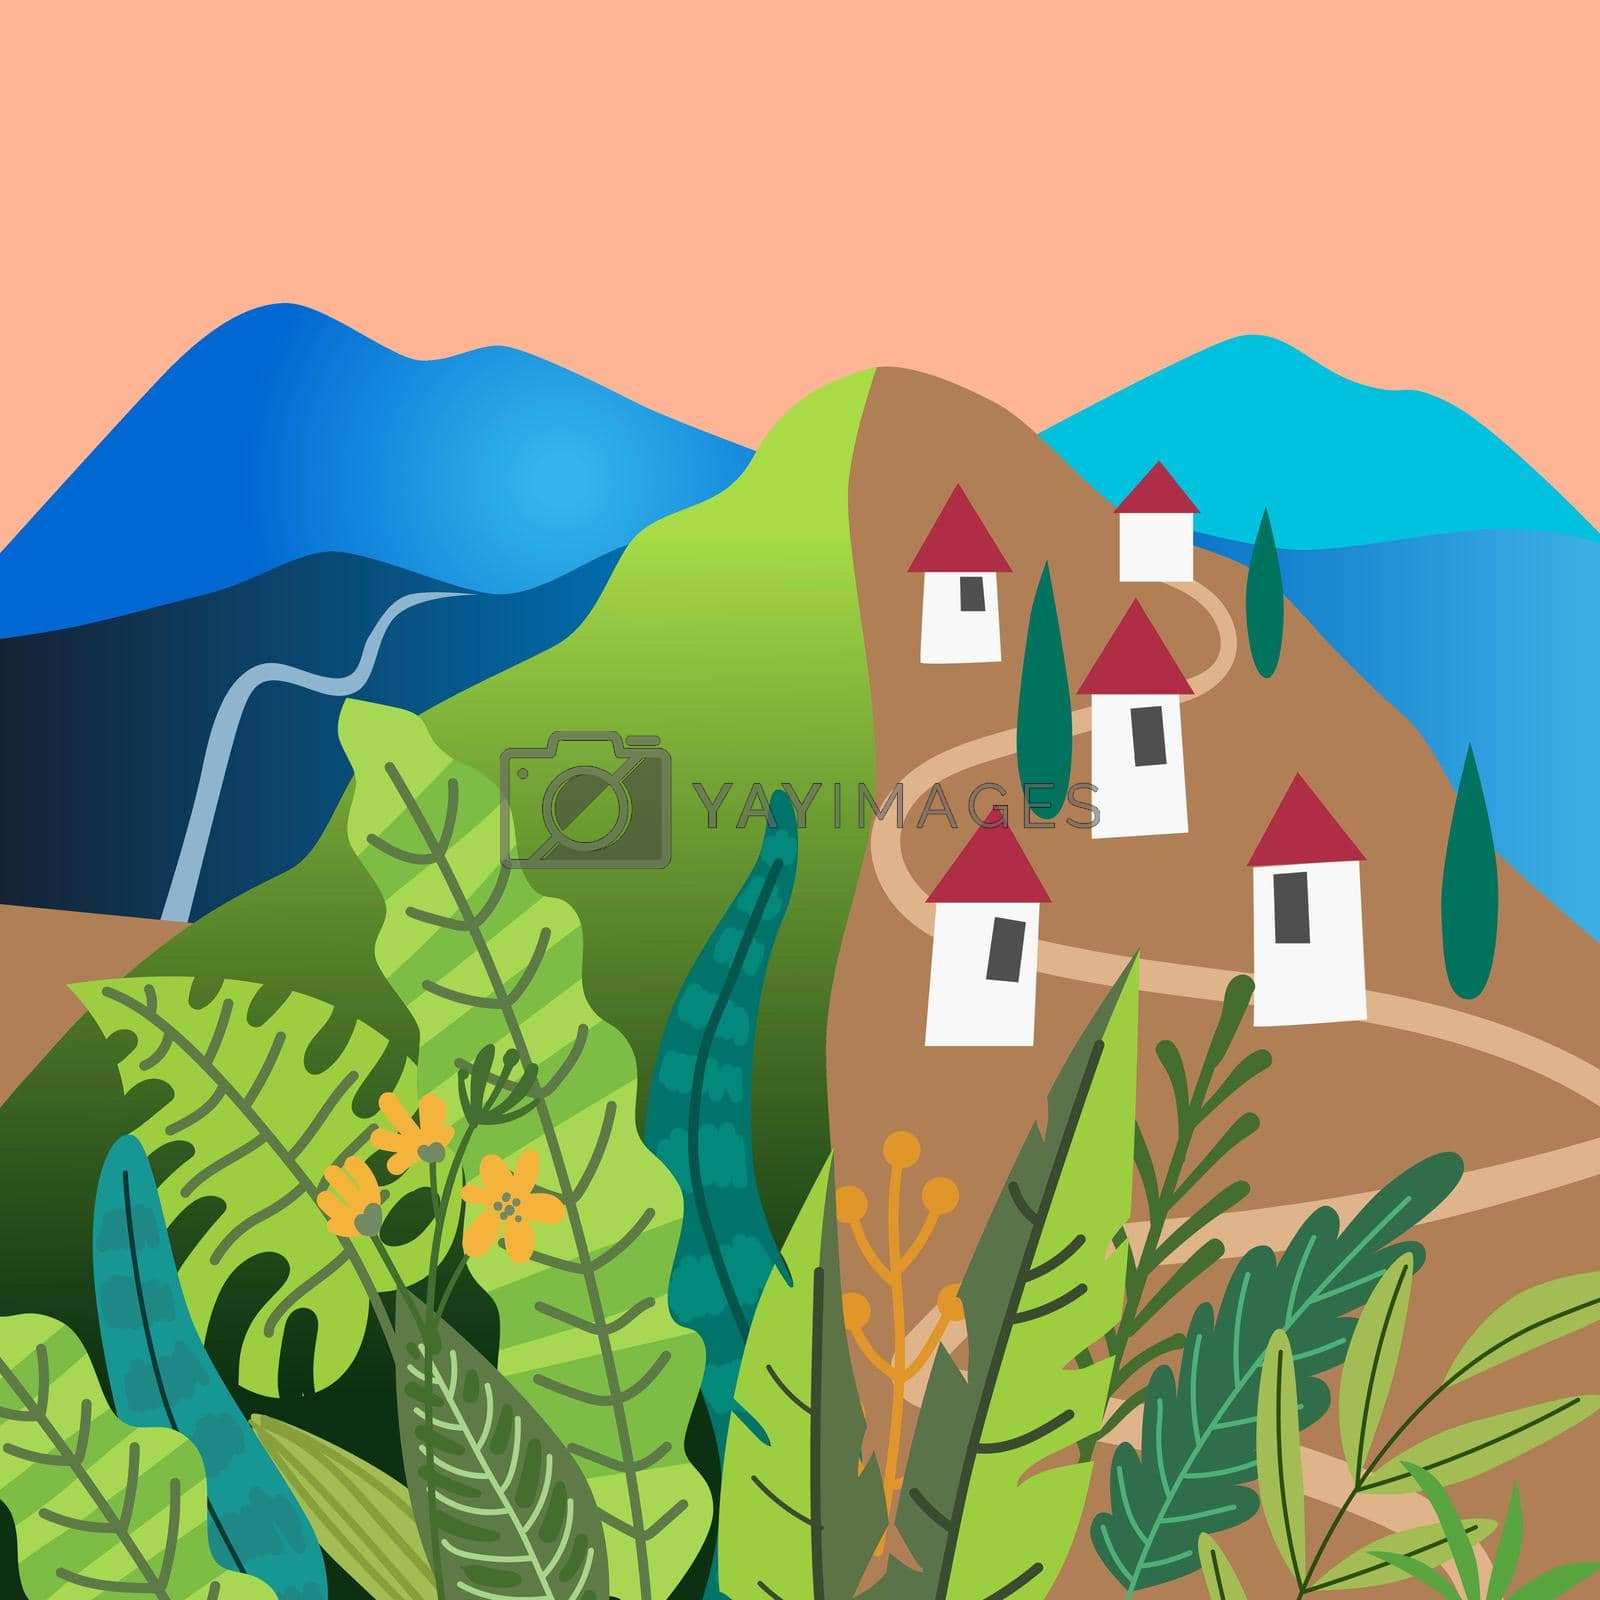 Vector village mountains landscape. Colorful beautiful illustration with mountains, houses and plants.